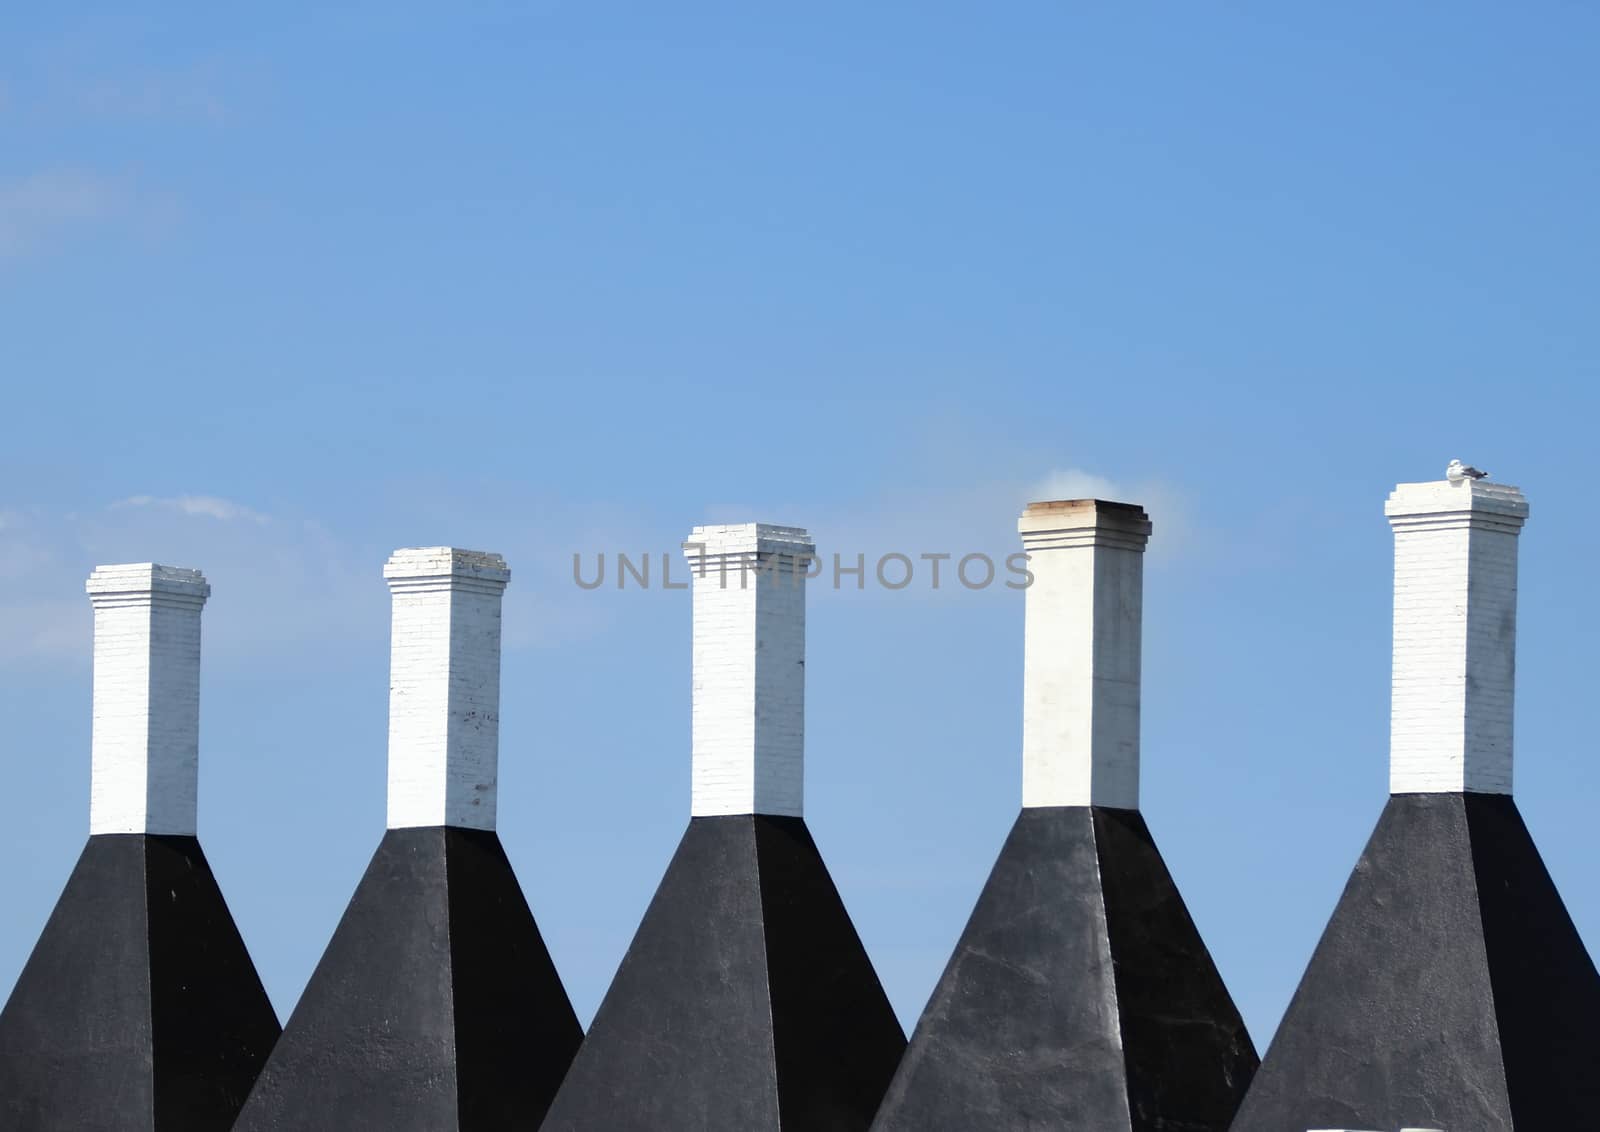 Five chimneys on a smokehouse with blue sky